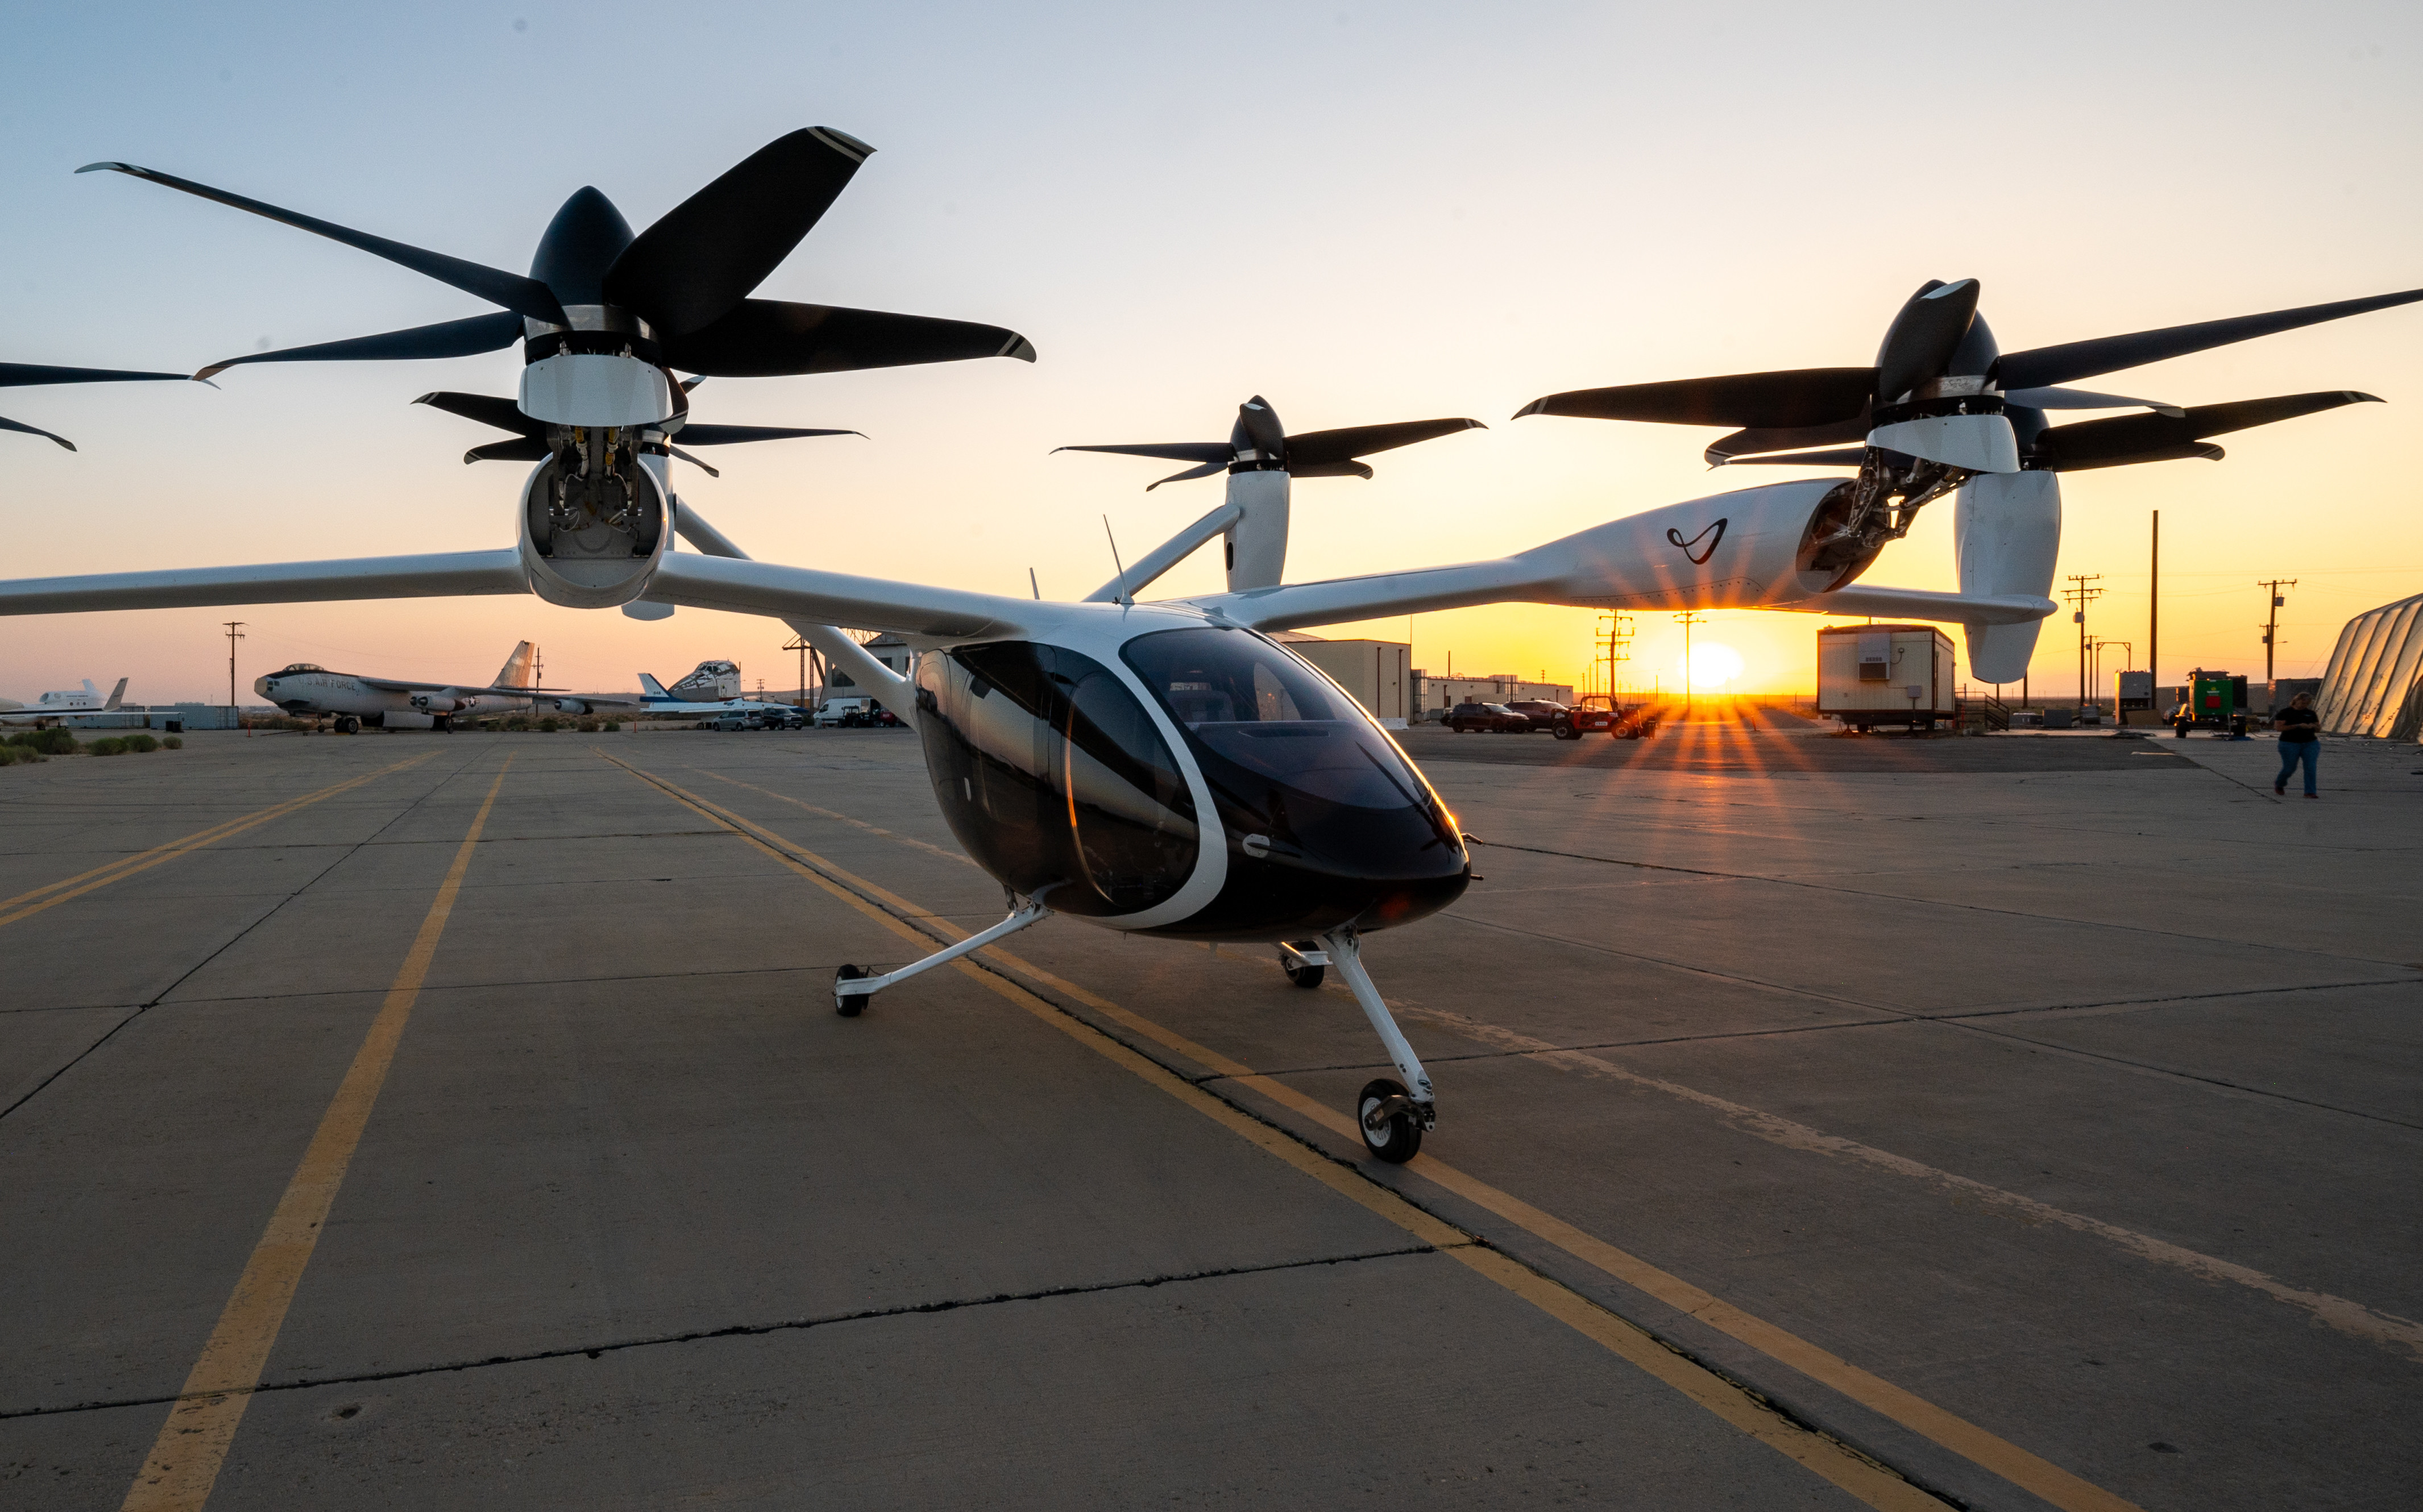 The eVTOL - What is it and will it work?